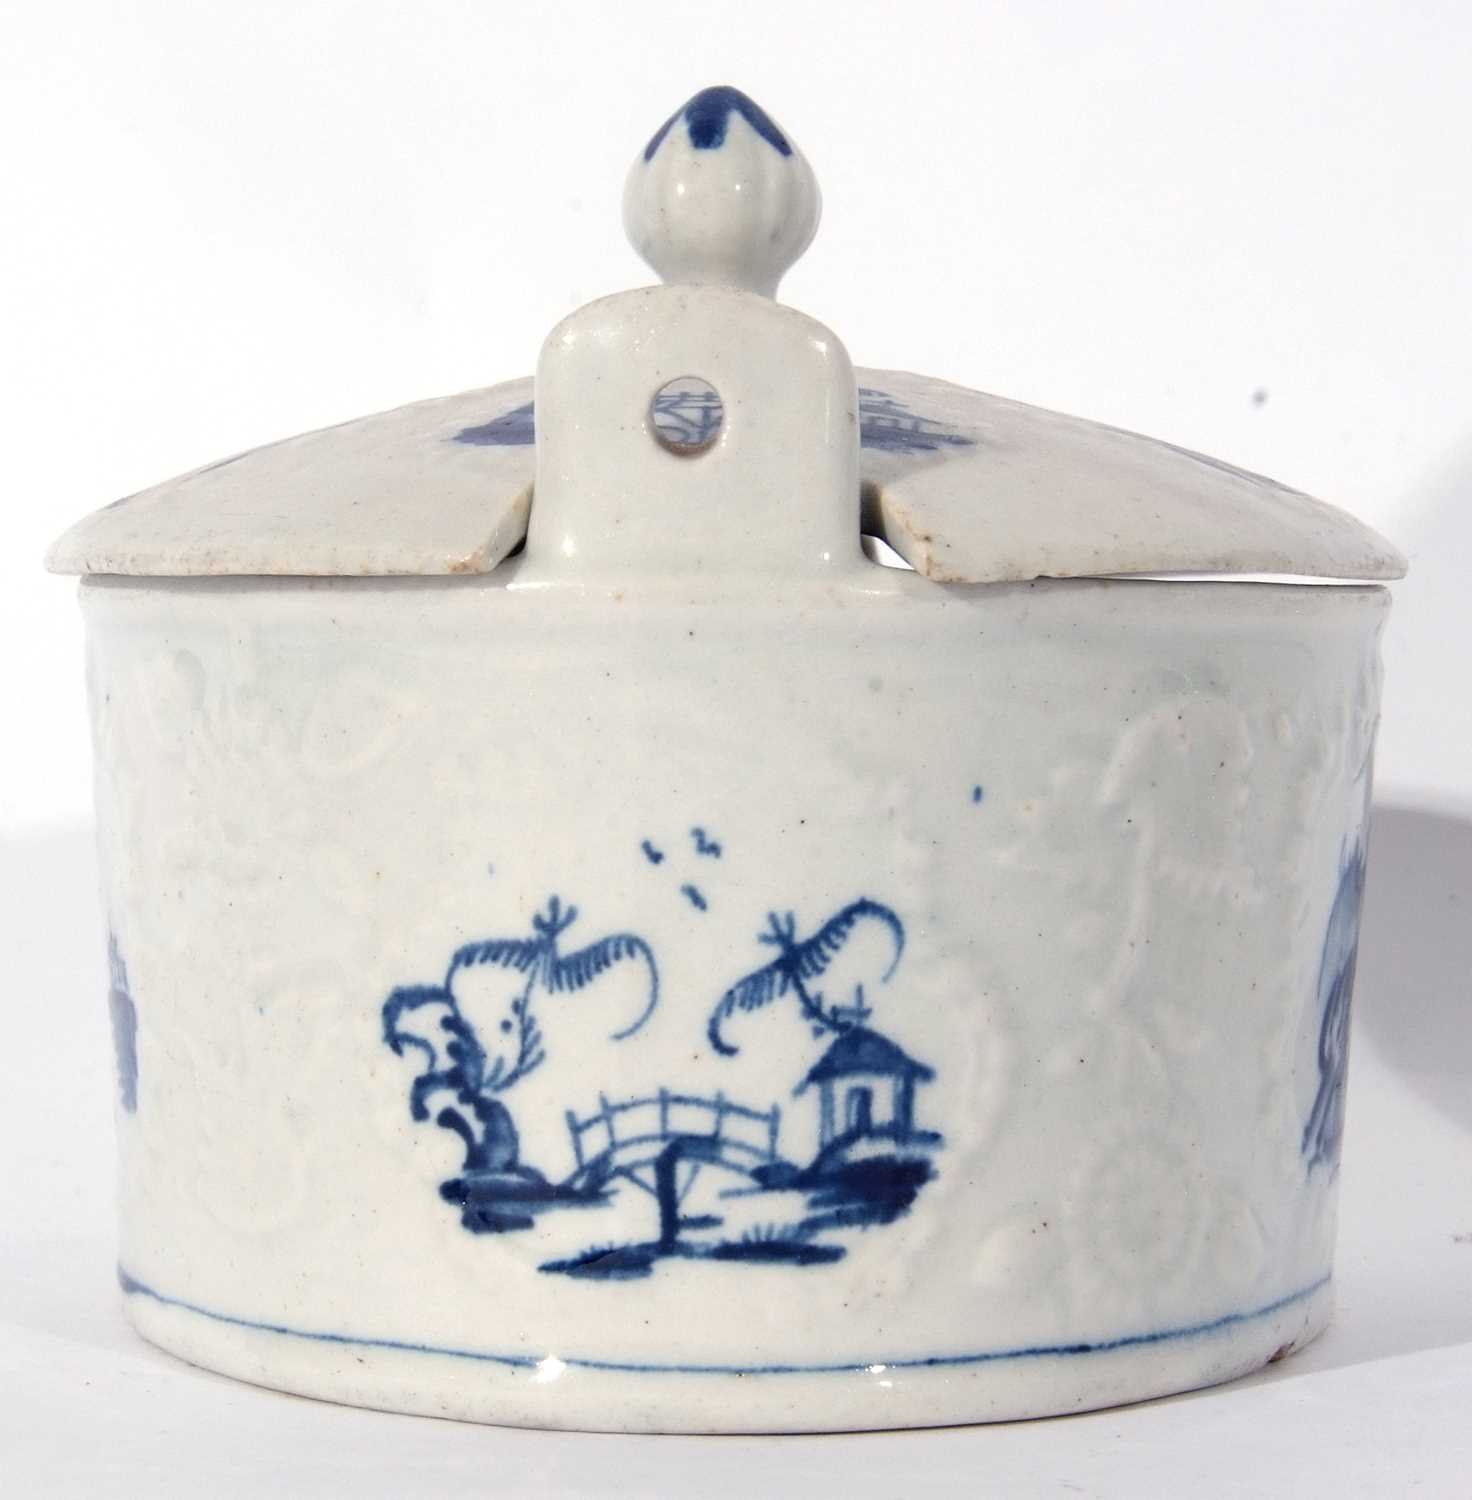 Lowestoft porcelain butter tub, cover and stand circa 1765, the tub moulded with flowers enclosing - Image 6 of 14